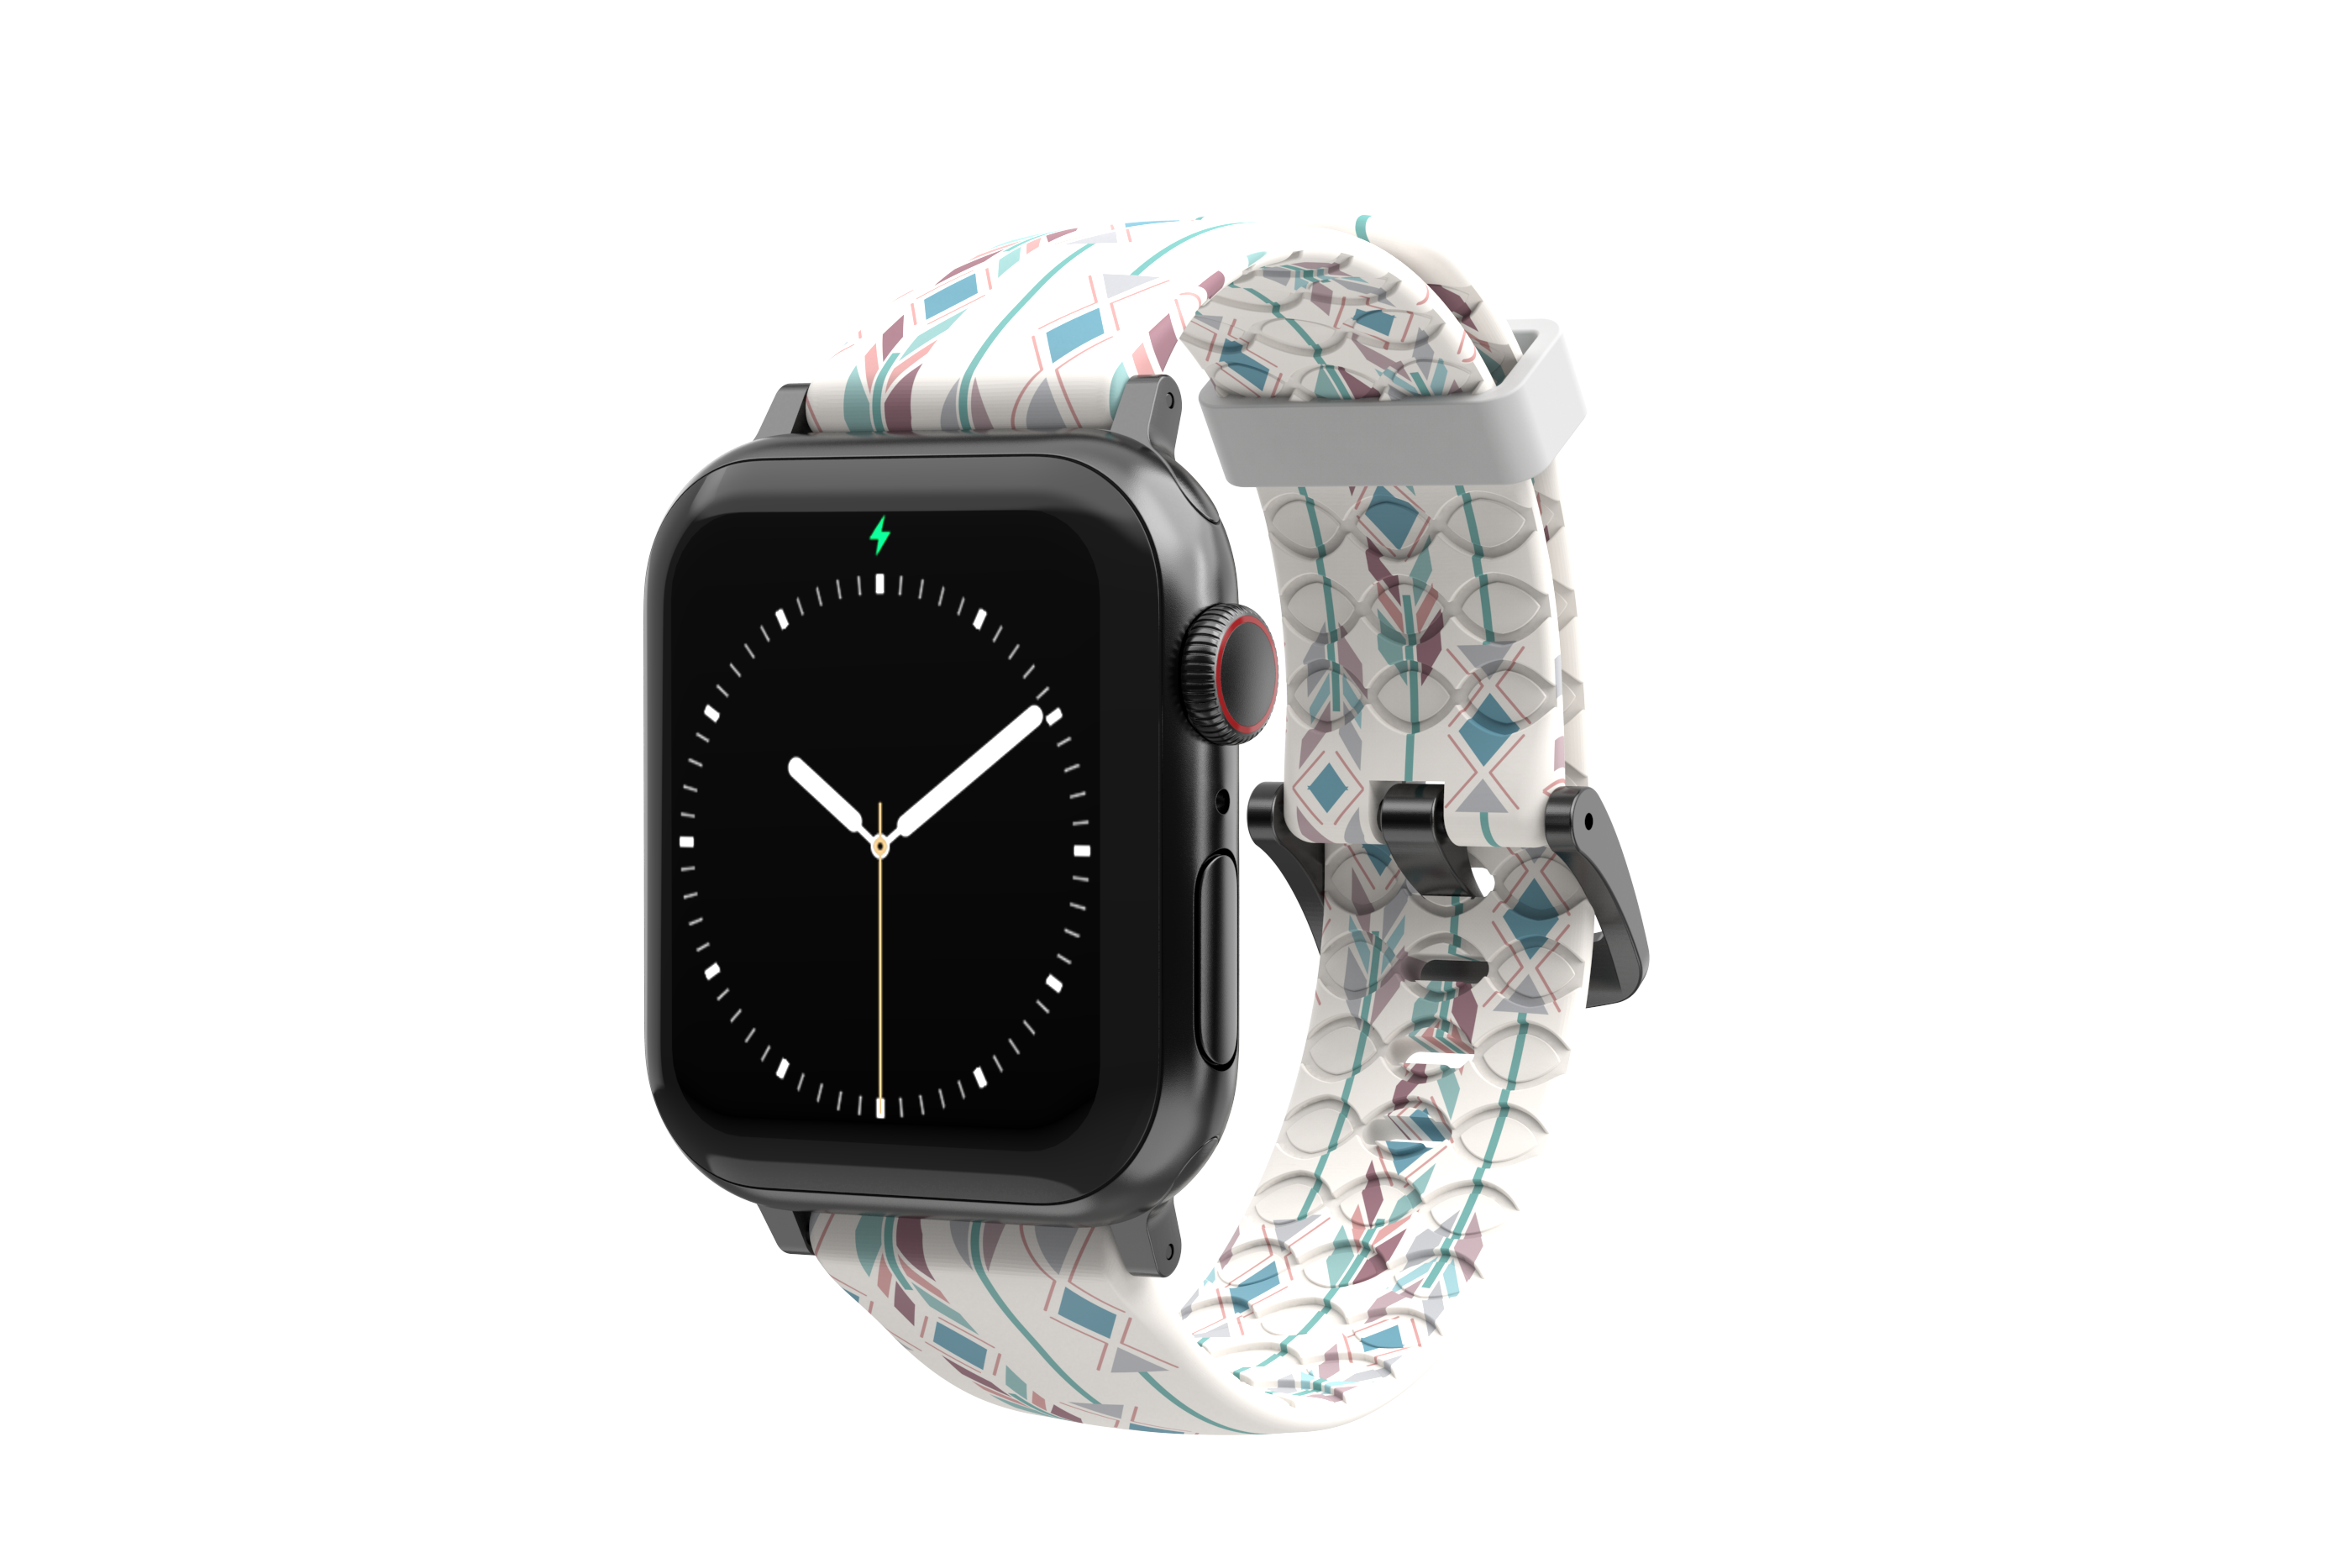 Wanderlust - Apple watch band with gray hardware viewed front on